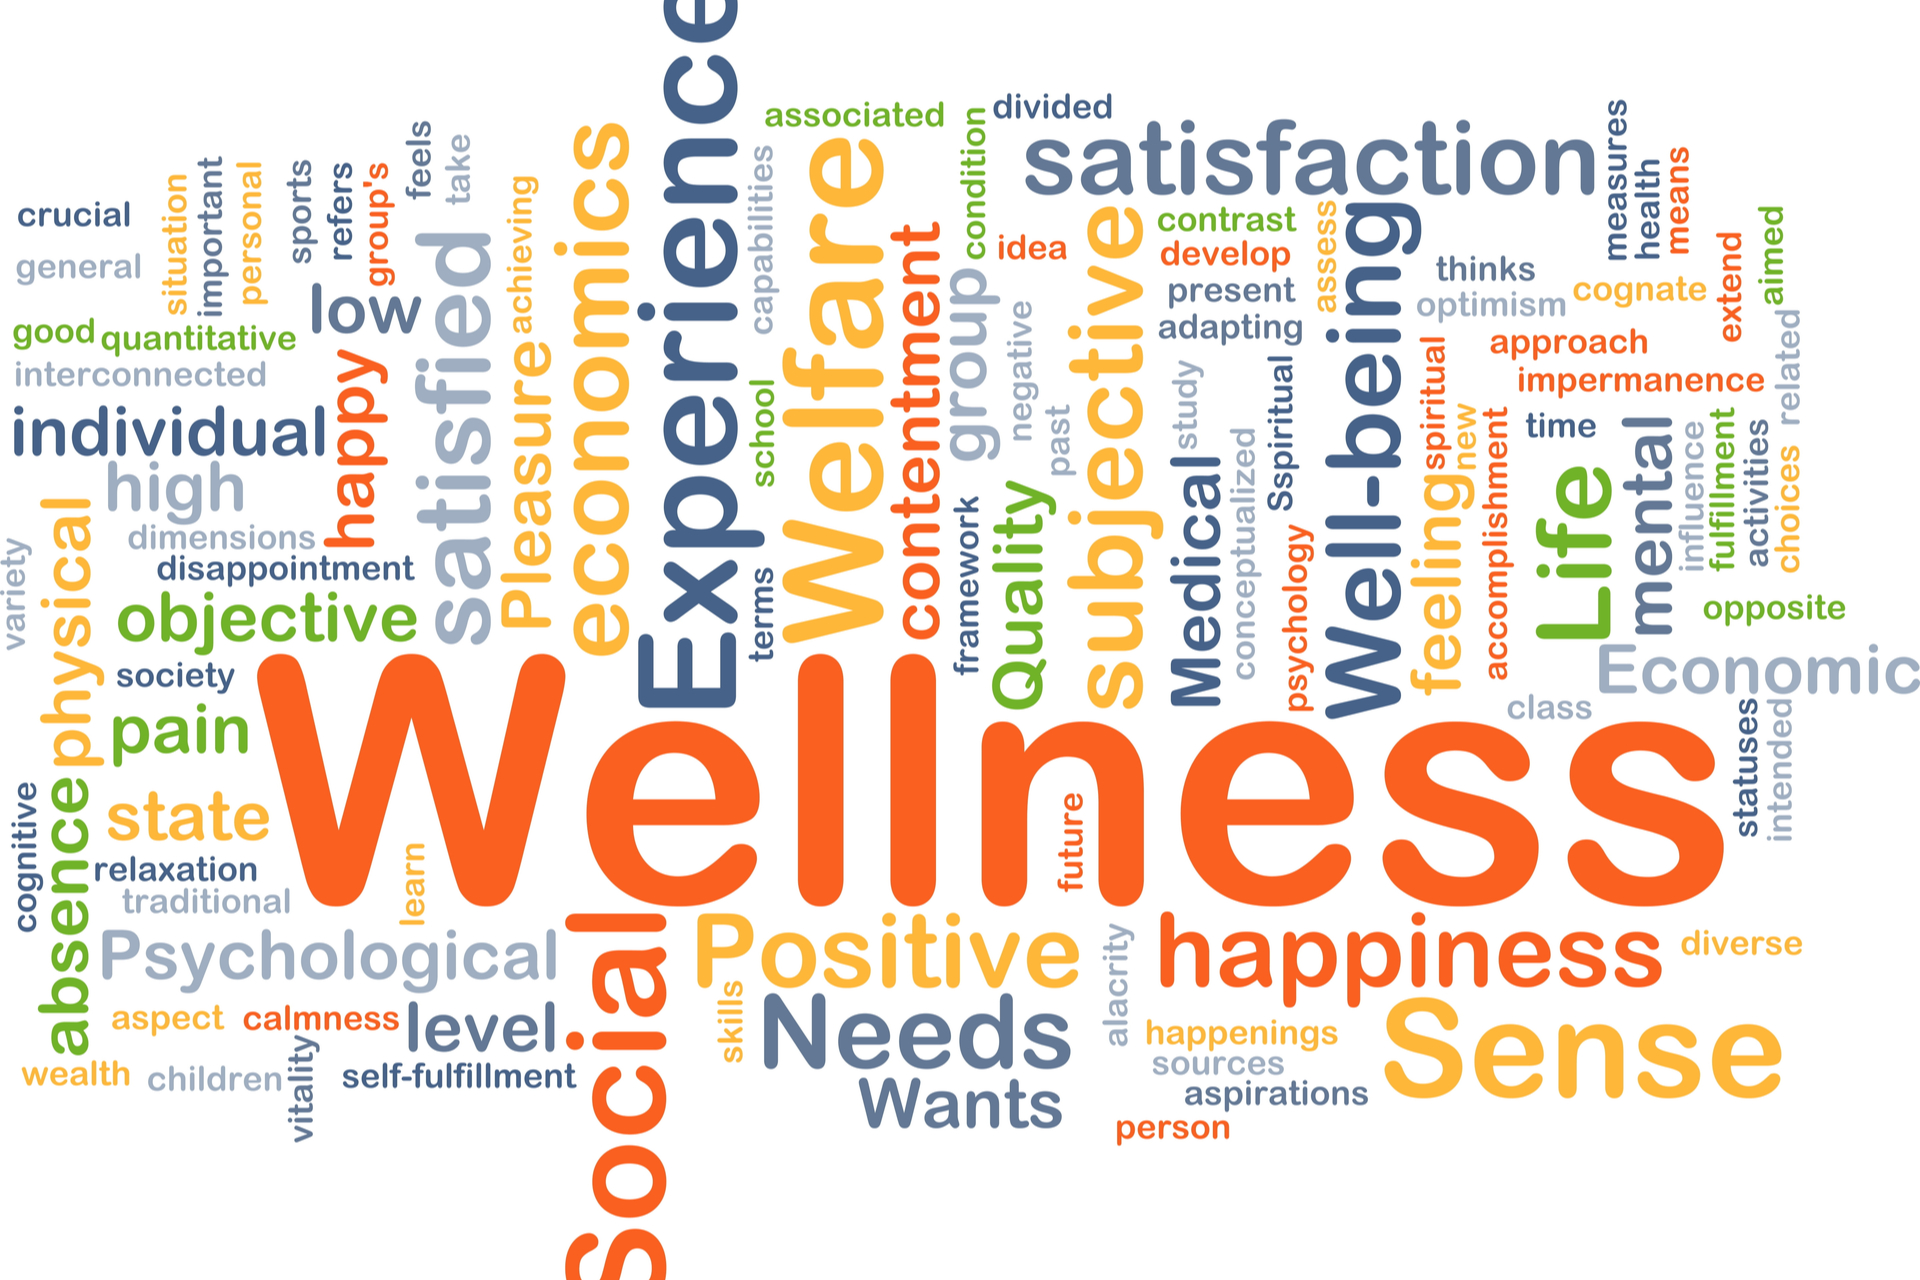 Build, Educate & Engage: Financial Wellness Benefits